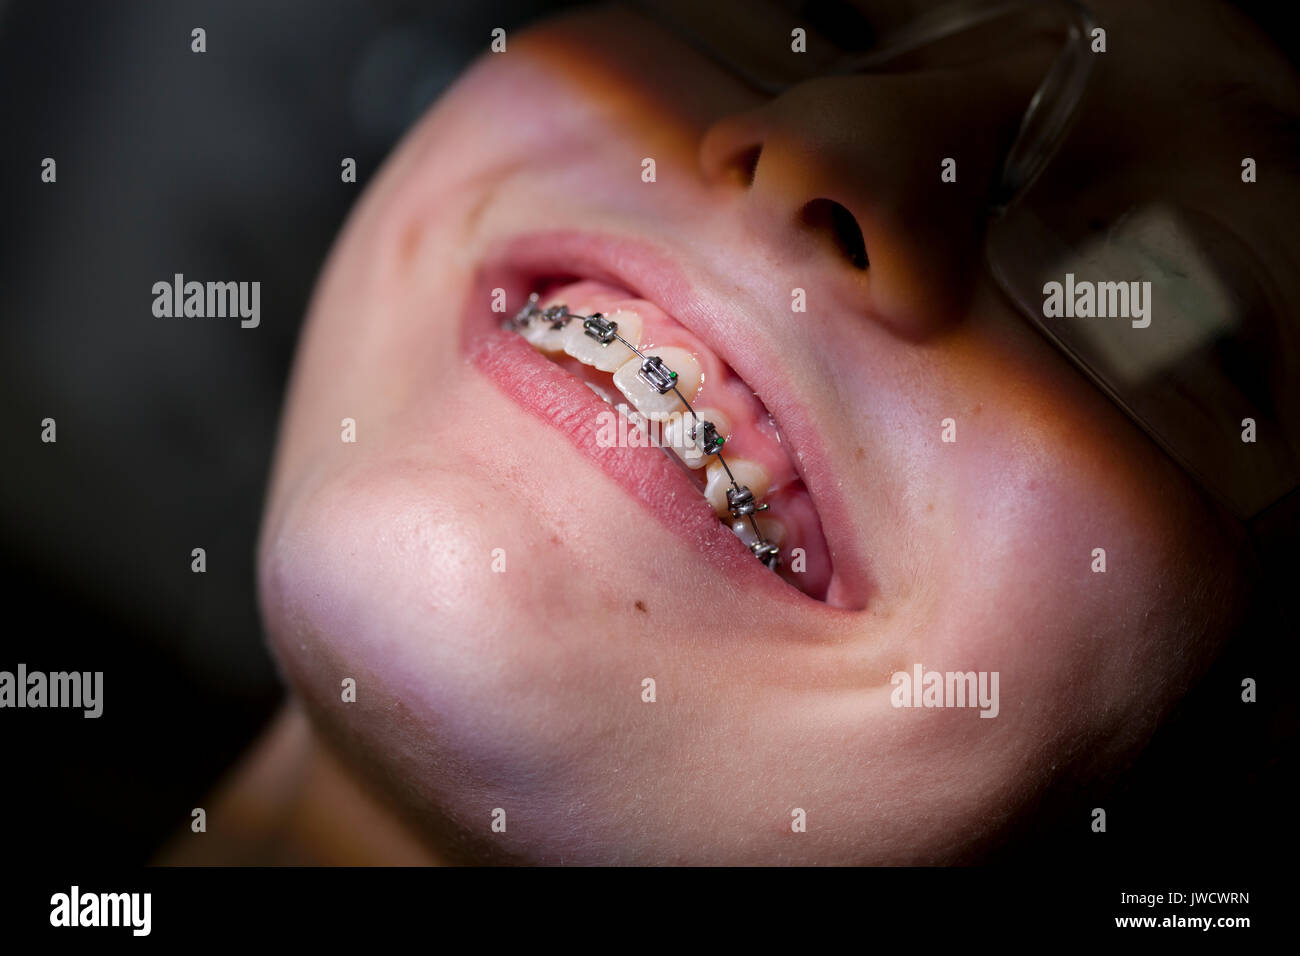 Teenage girl after having her brace fitted at the orthodontist Stock Photo